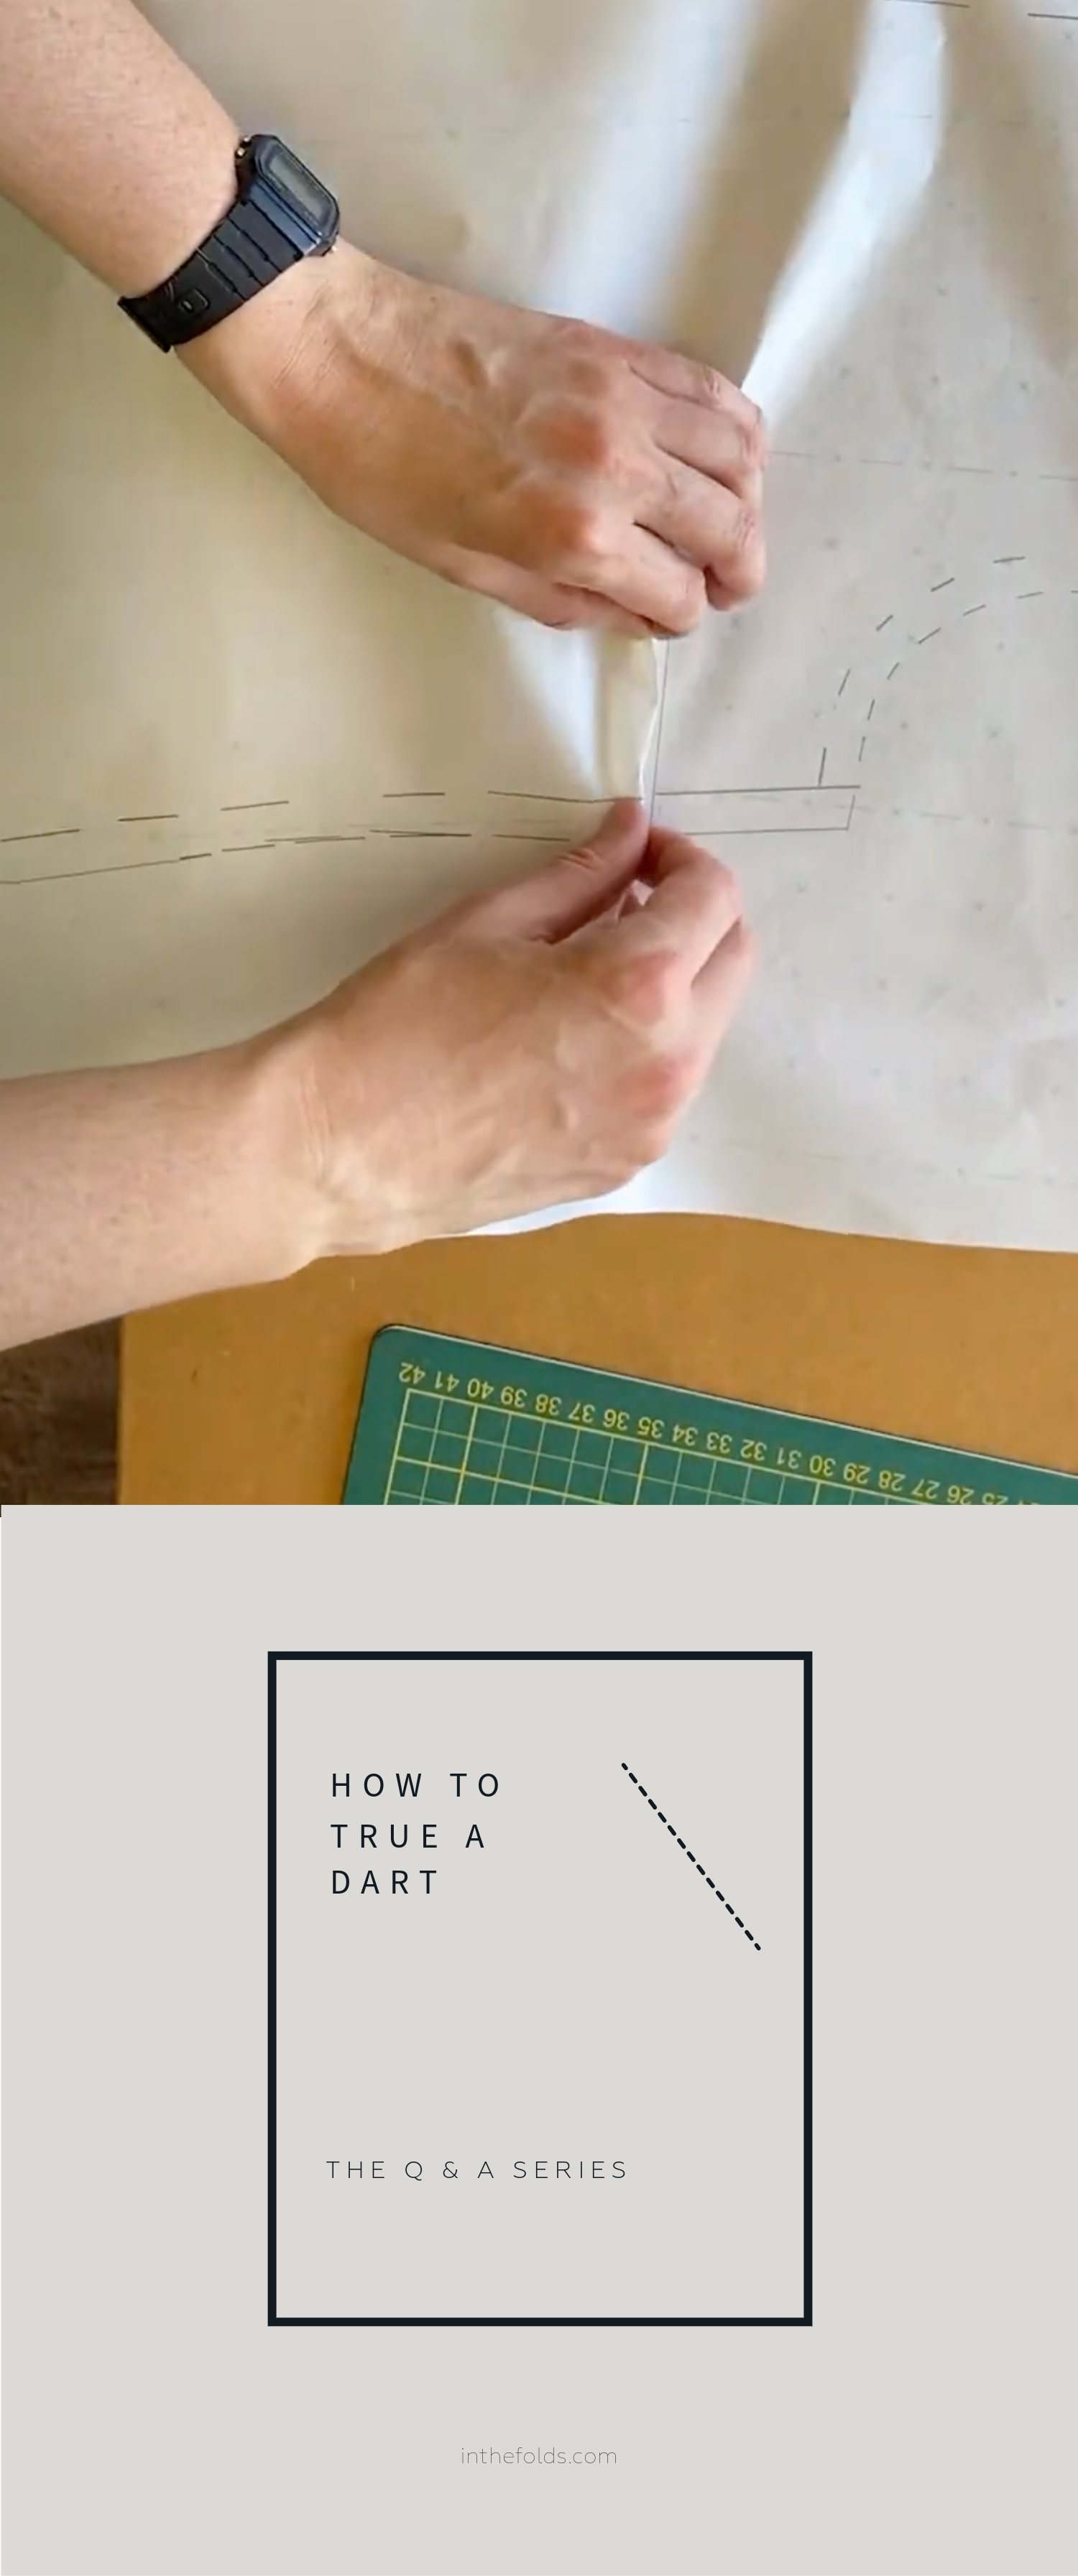 How to Blend Sewing Pattern Sizes when there are Darts or Pleats - Designer  Stitch